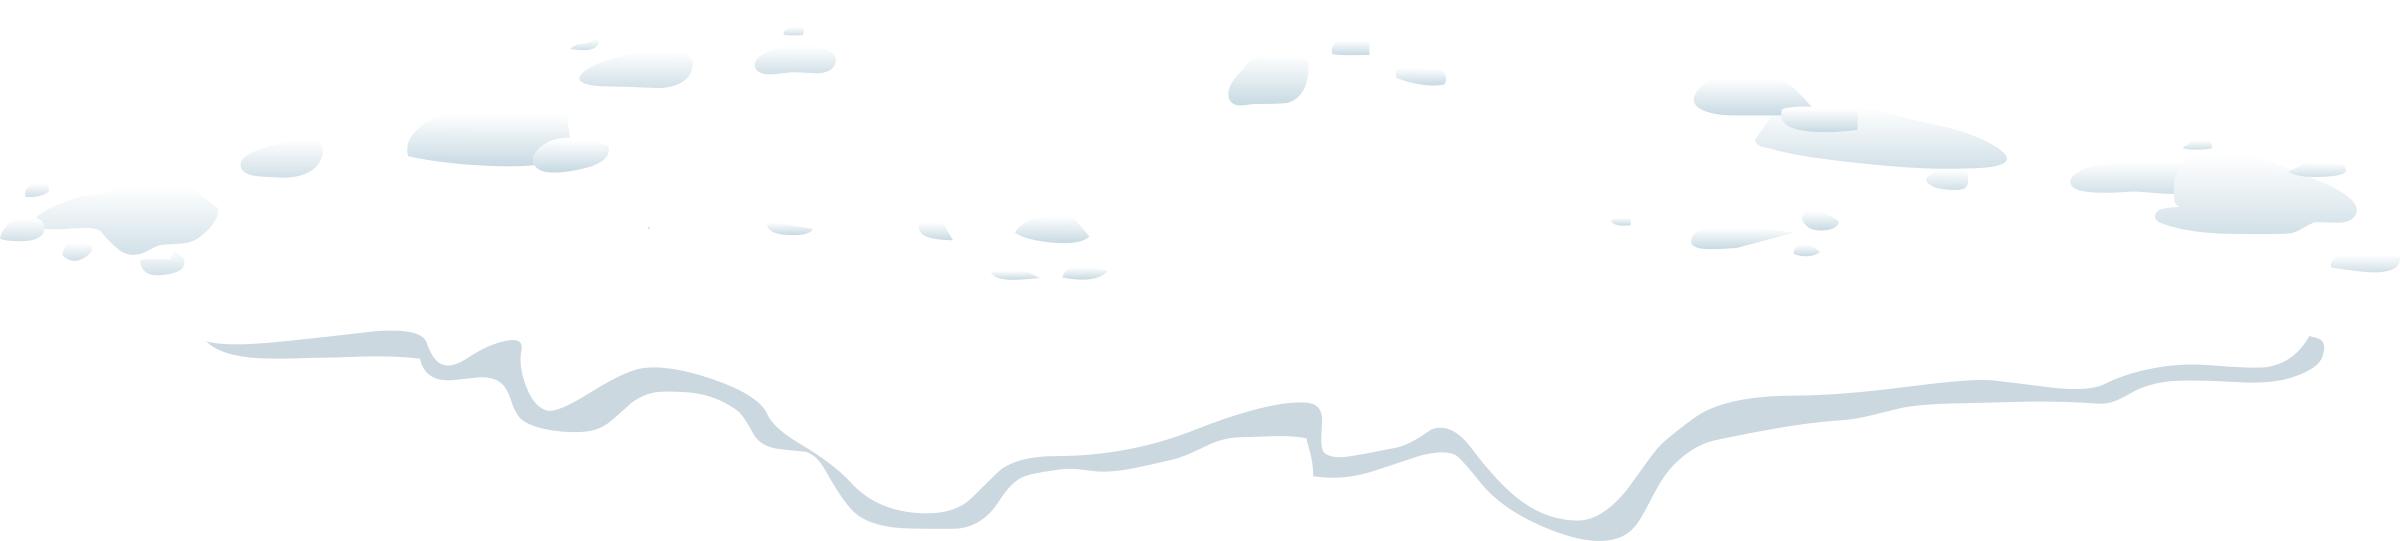 Alpine Landscape Snow Drift 01b Al1 Icons PNG - Free PNG and Icons ...